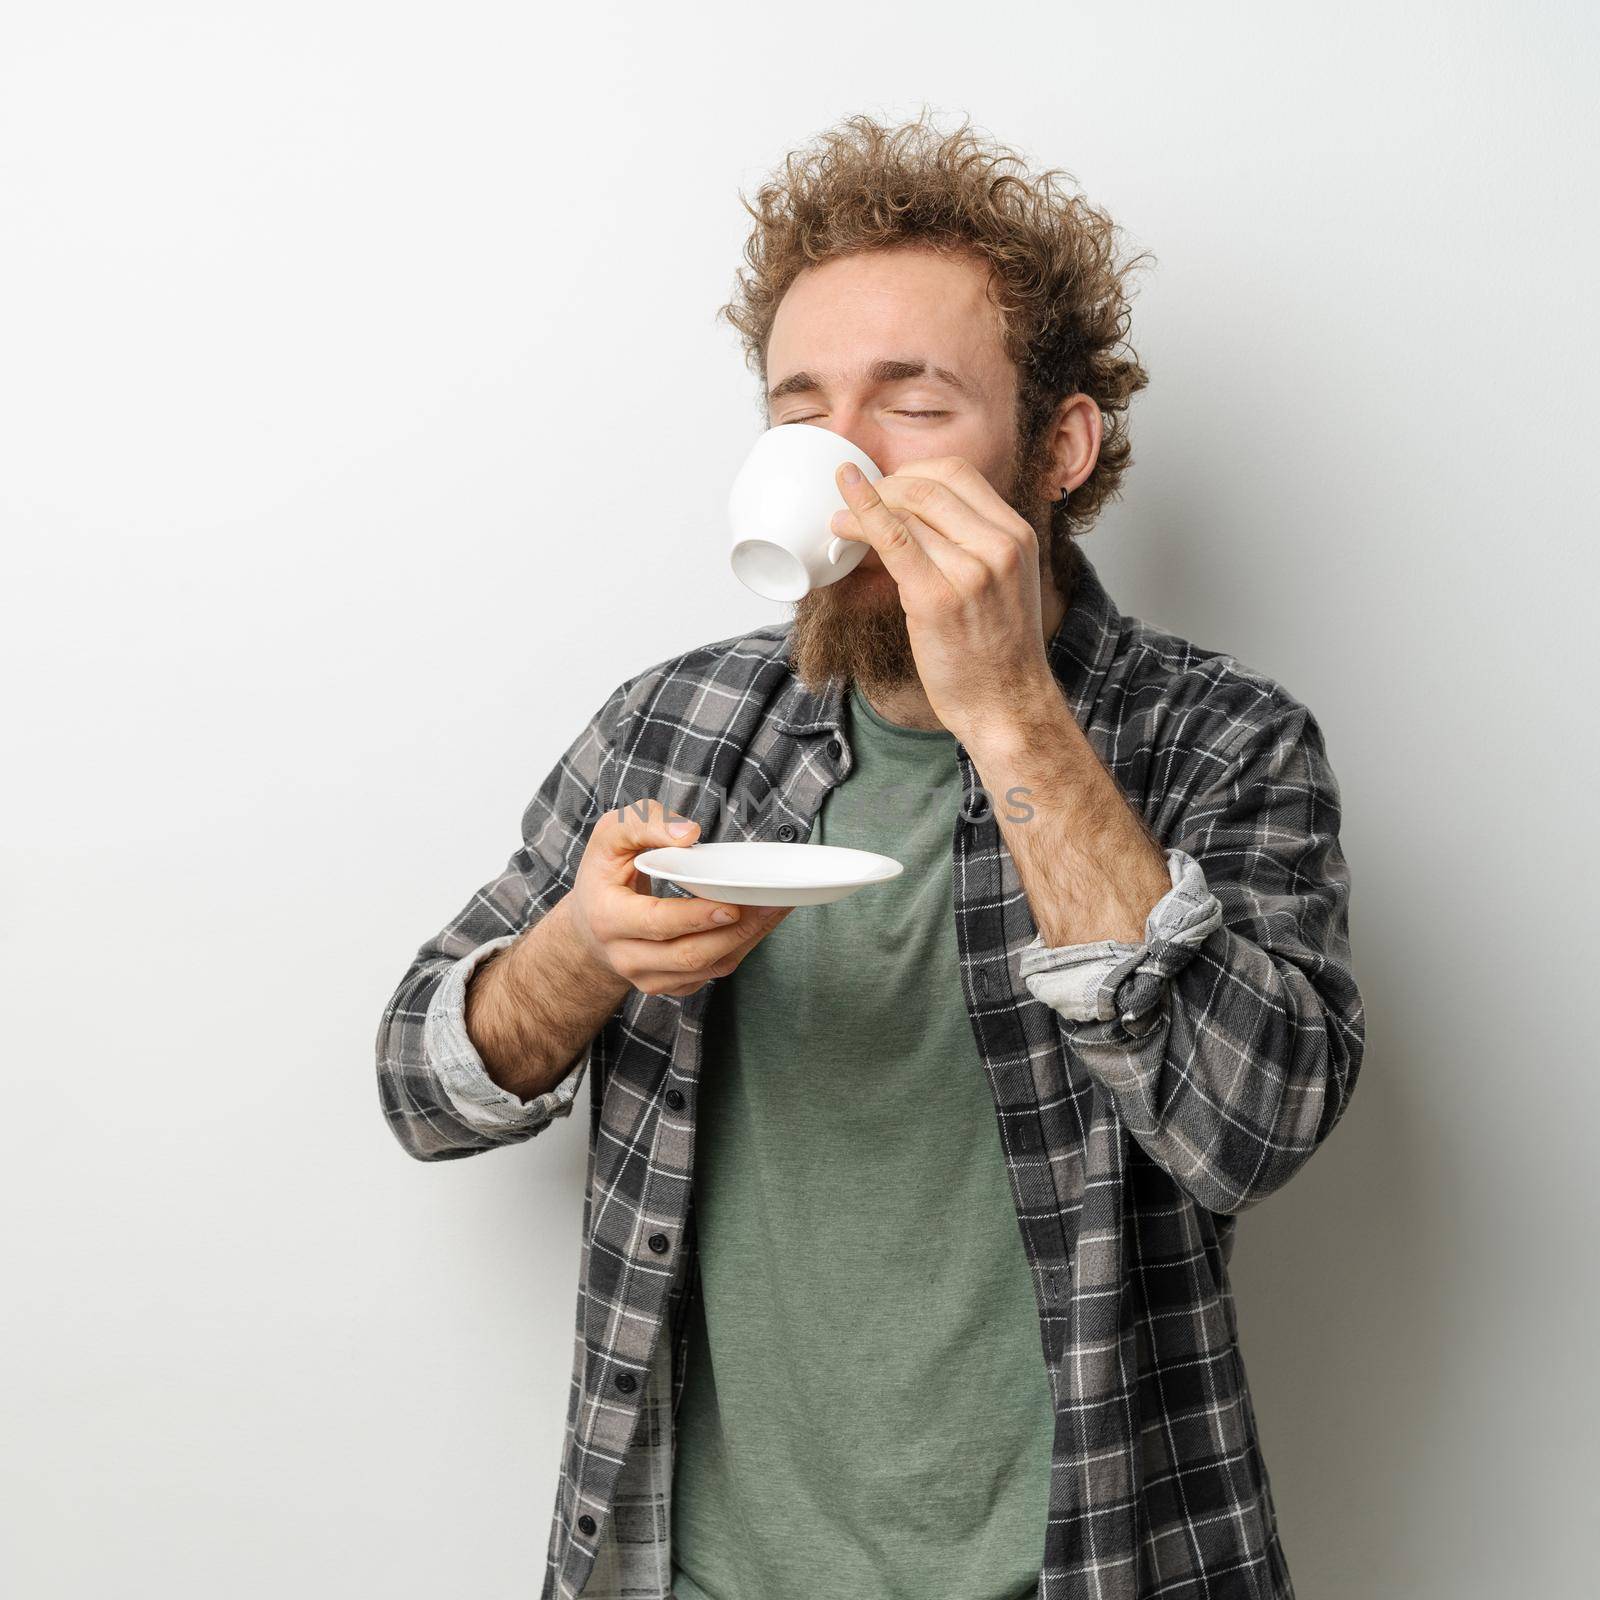 Good looking man with curly hair and beard drinking coffee holding cup, wearing plaid long sleeve shirt isolated on white background.